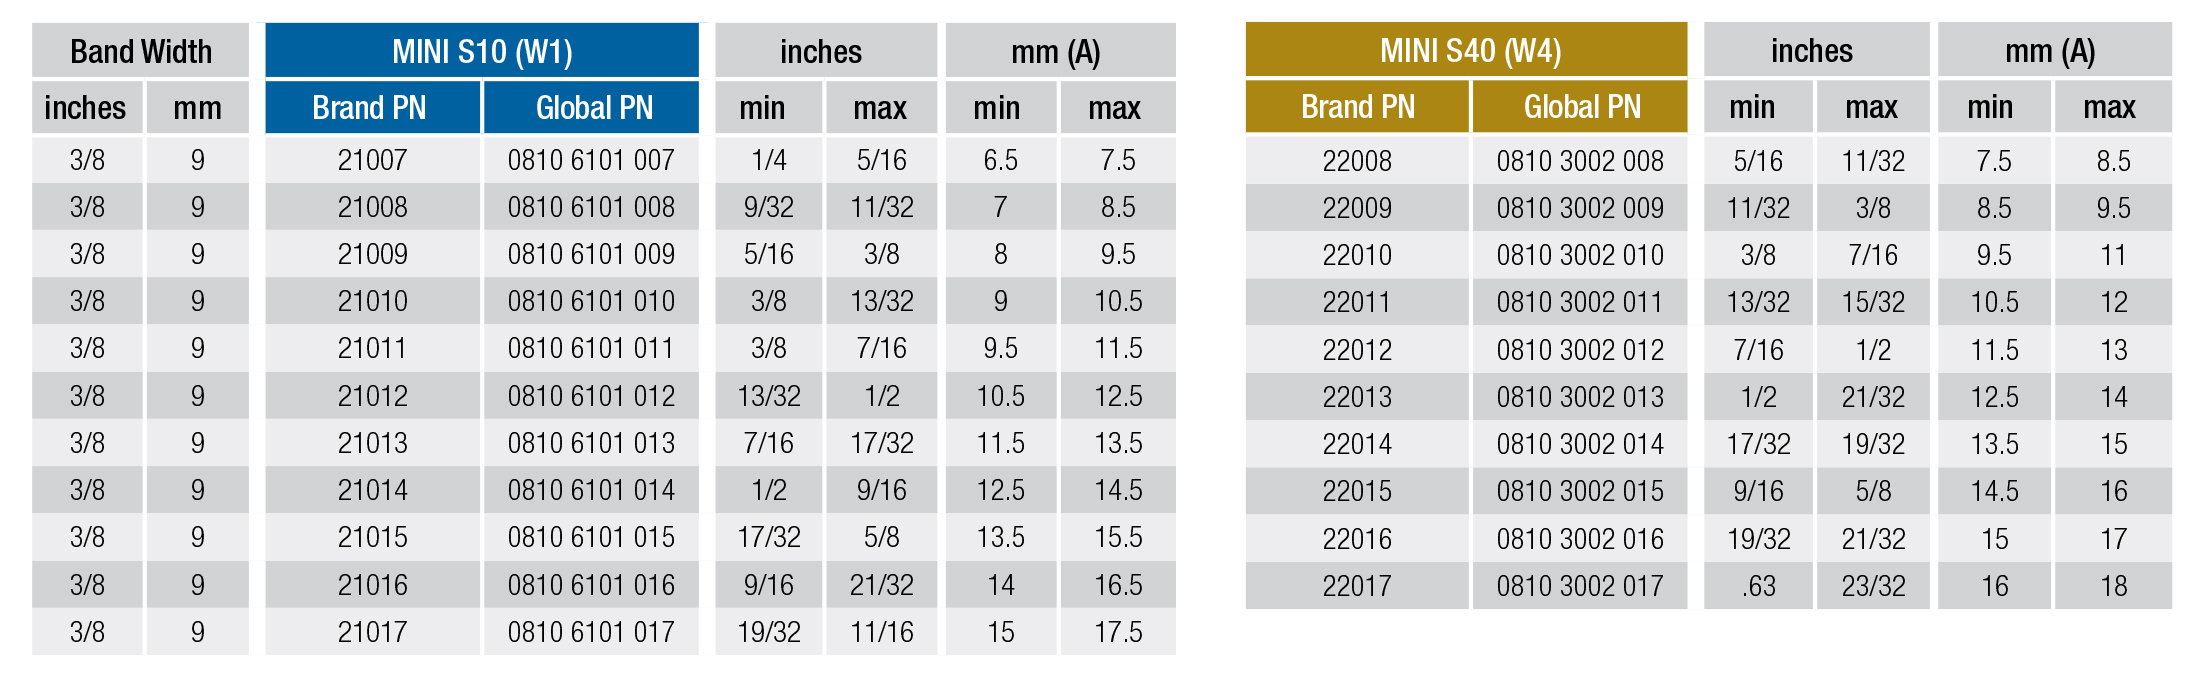 ABA Mini Product Specifications